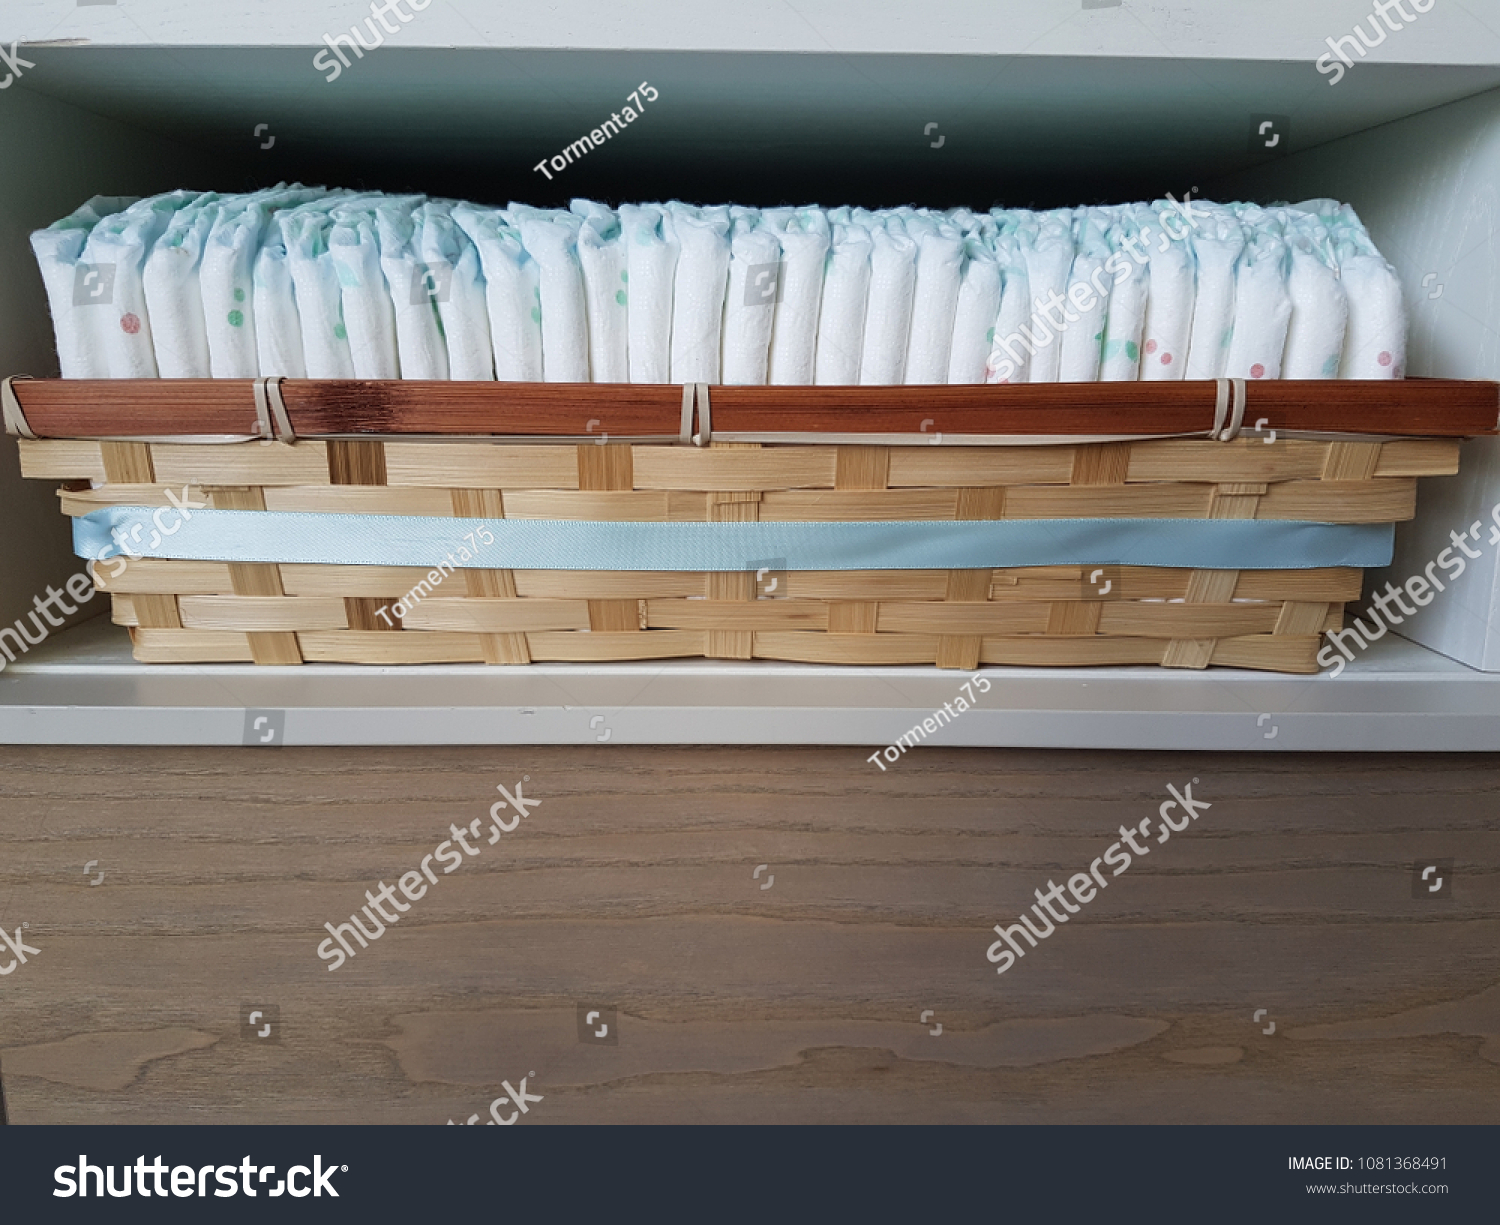 Basket with disposable baby diapers on wooden background. 
Copy space


 #1081368491